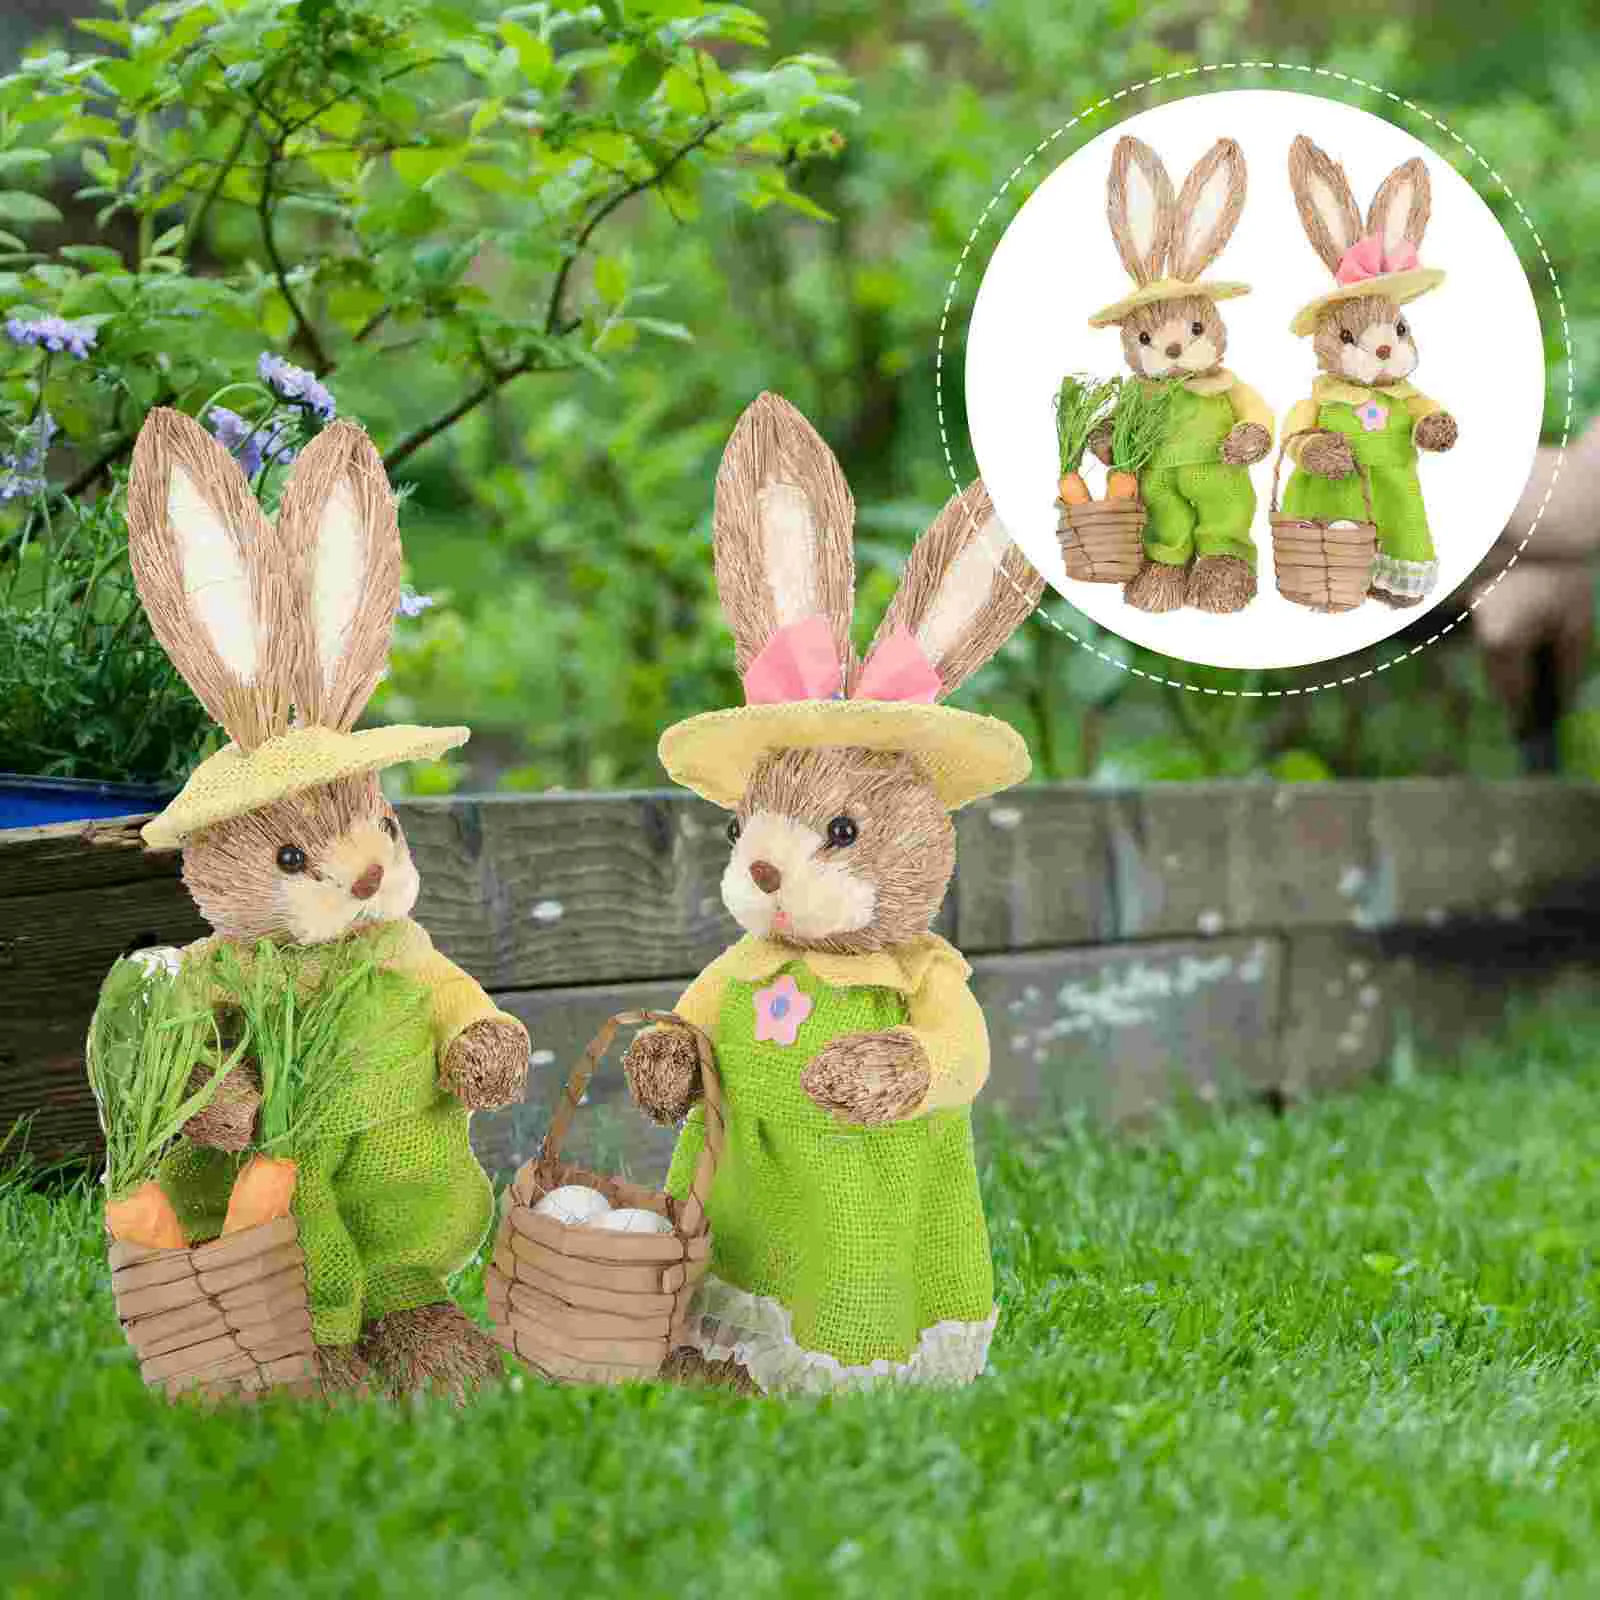 

Bunny Easter Rabbit Straw Woven Figurine Figurines Ornament Decoration Garden Standing Statues Decor Statue Holding Animal Hand